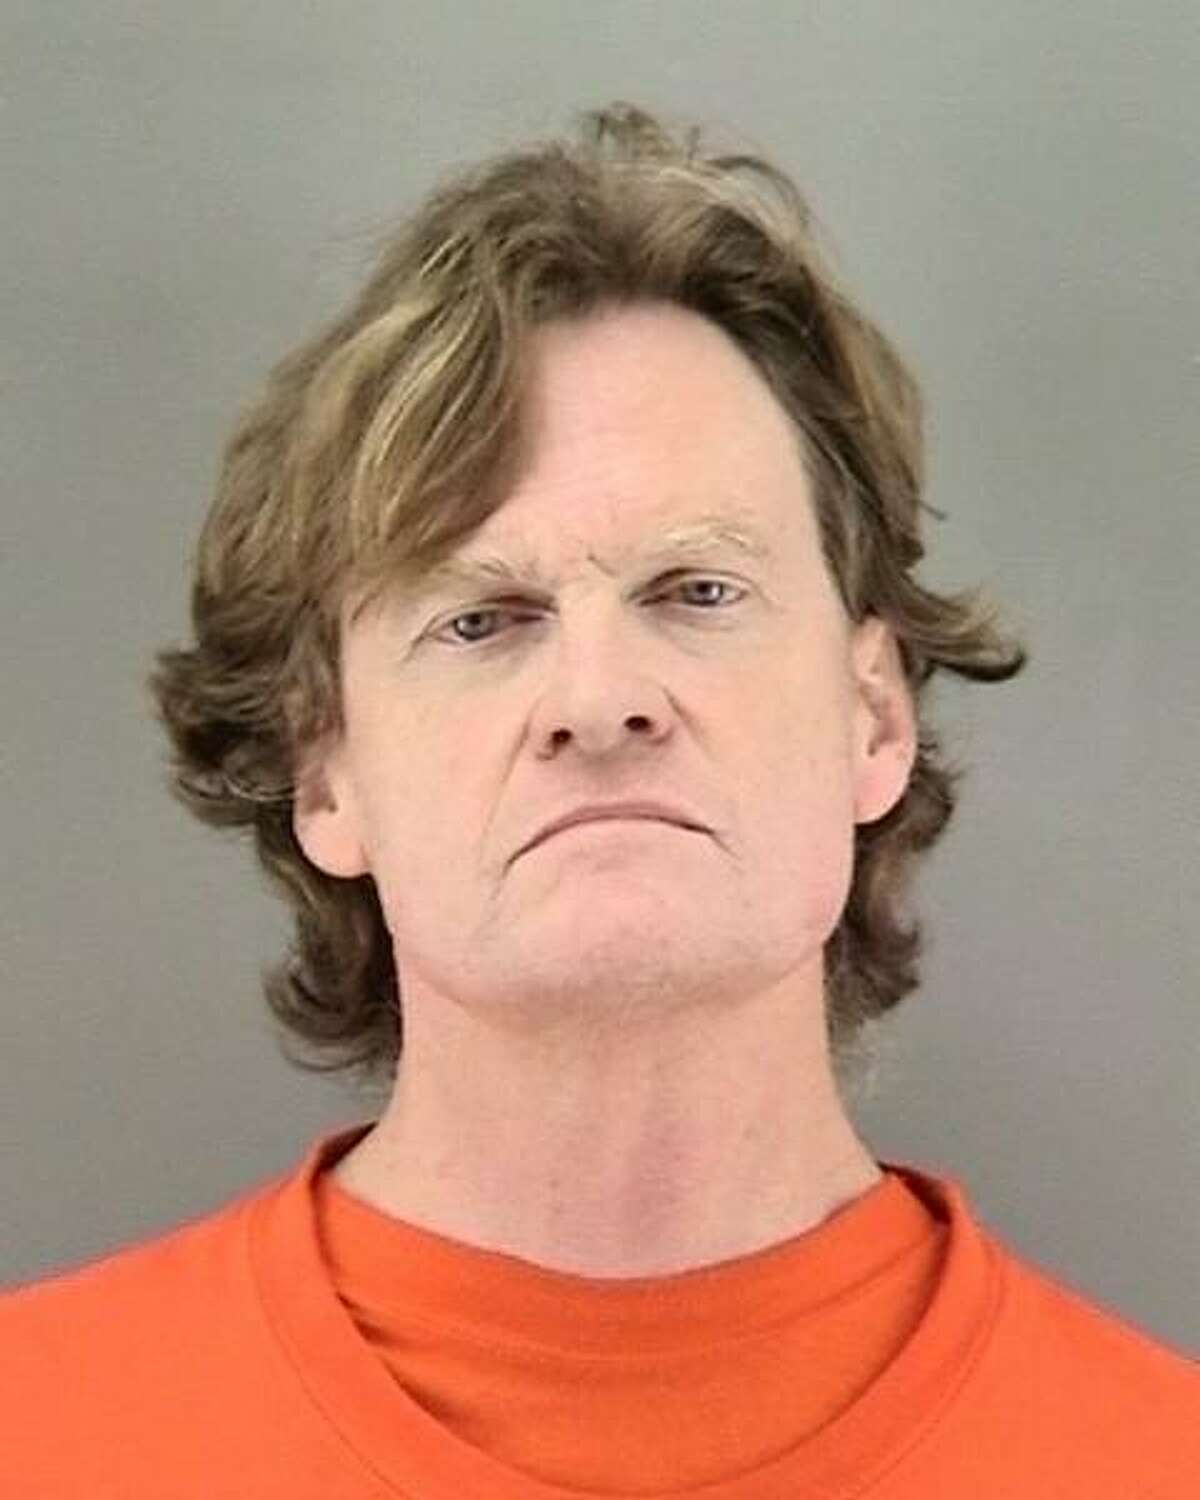 San Francisco resident Gerard Jones, 59, was arrested on suspicion of possessing more than 600 files of child pornography, police said.